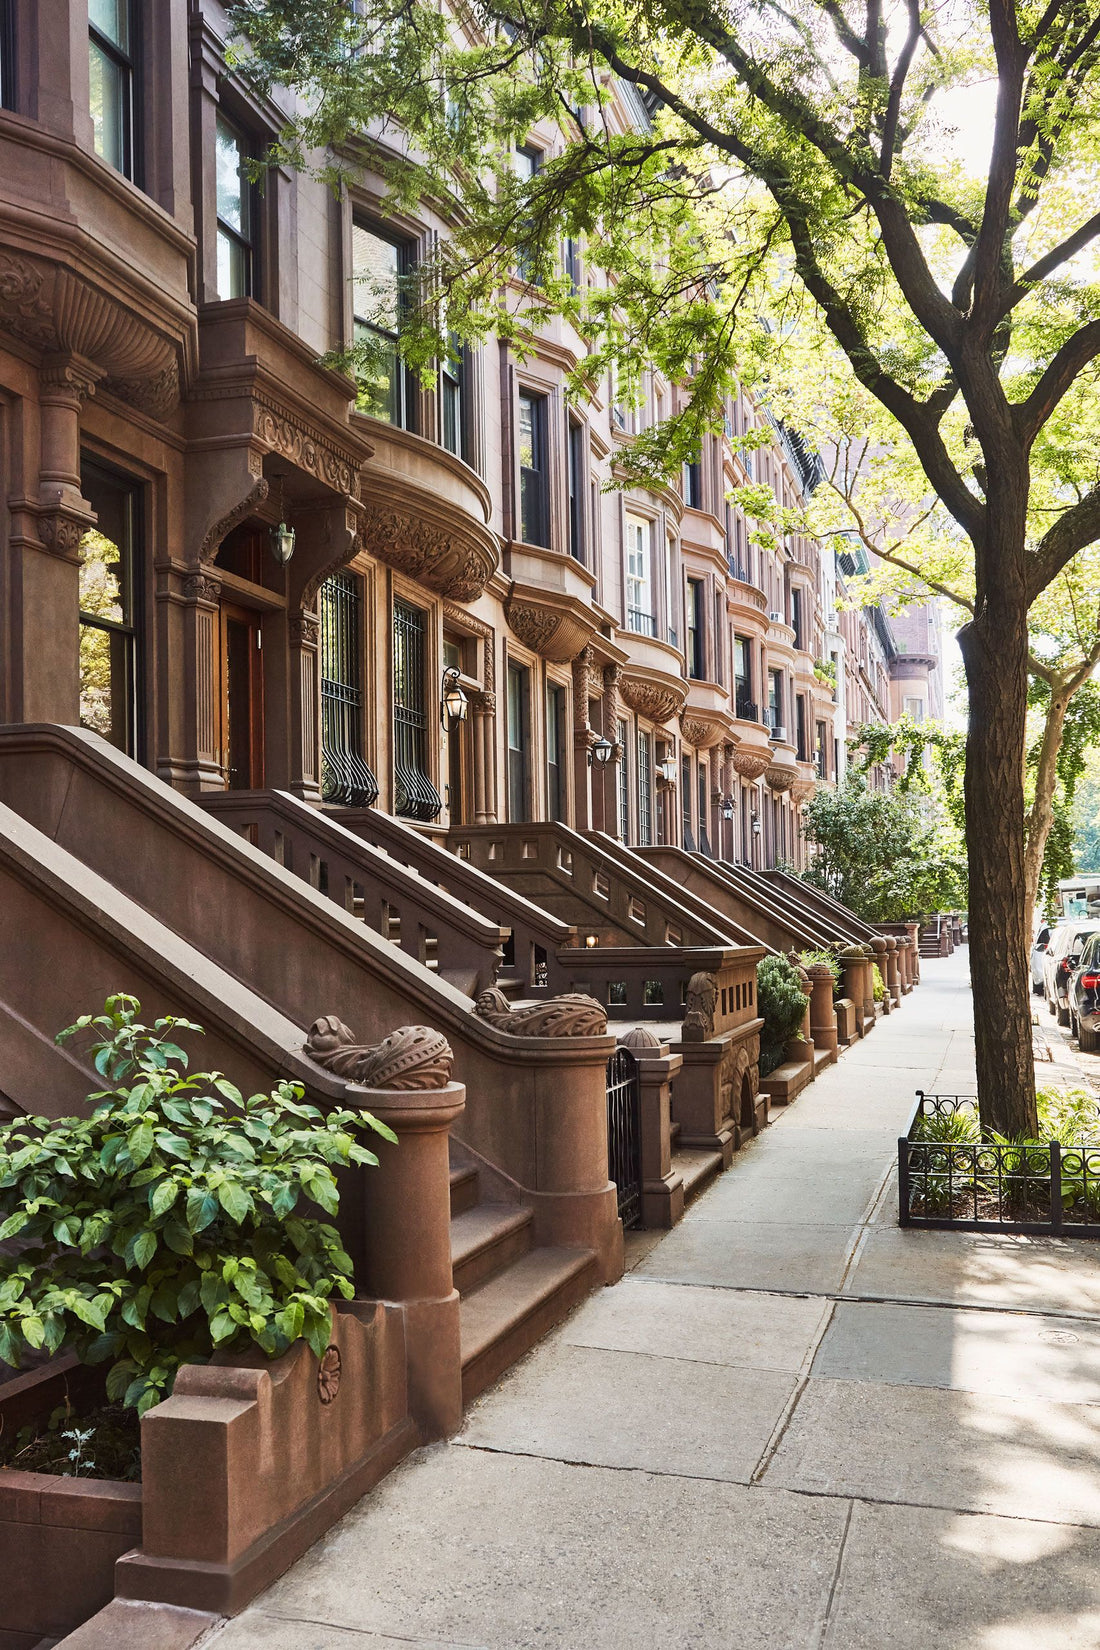 Brownstone Houses: The Enduring Charm of Brooklyn's Architectural Gems